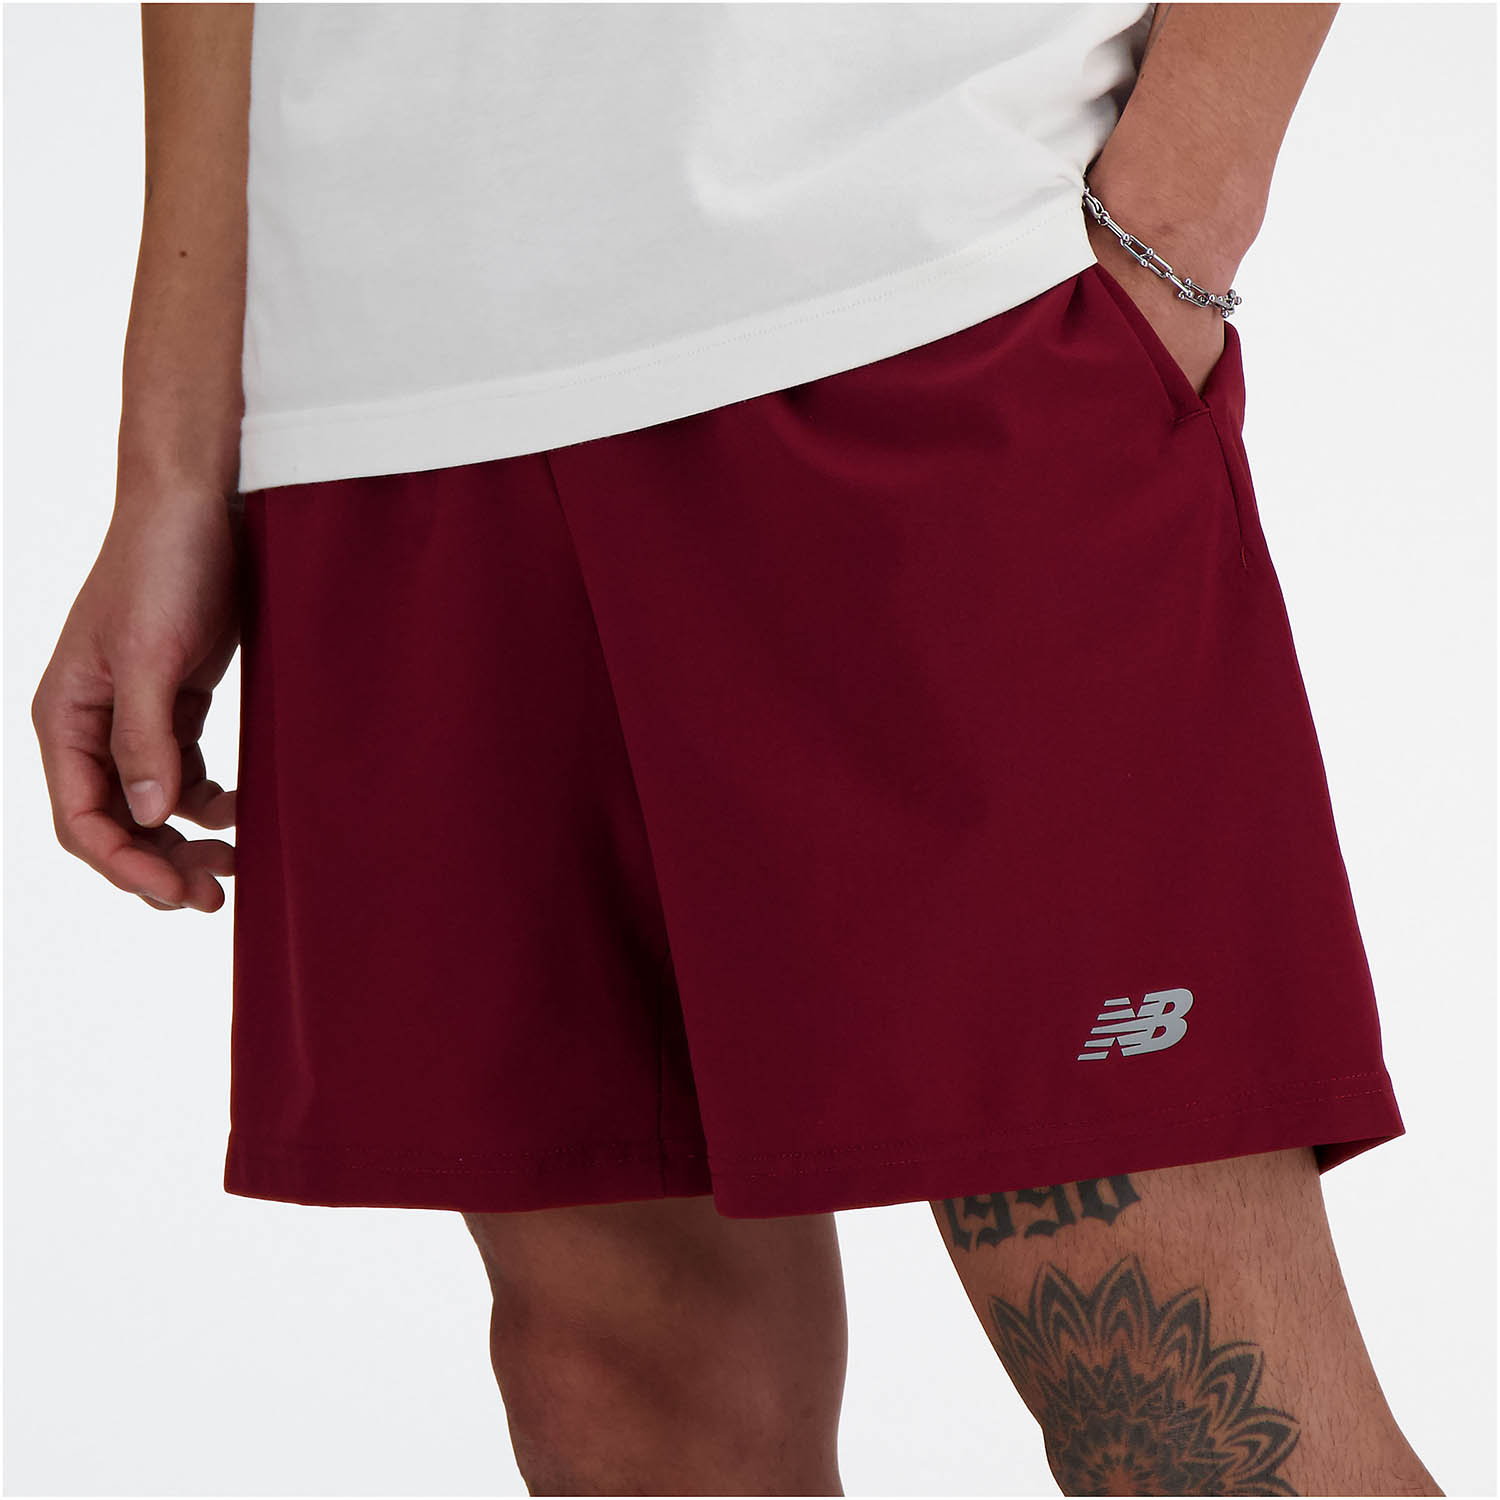 New Balance Performance 7in Shorts - Mineral Red